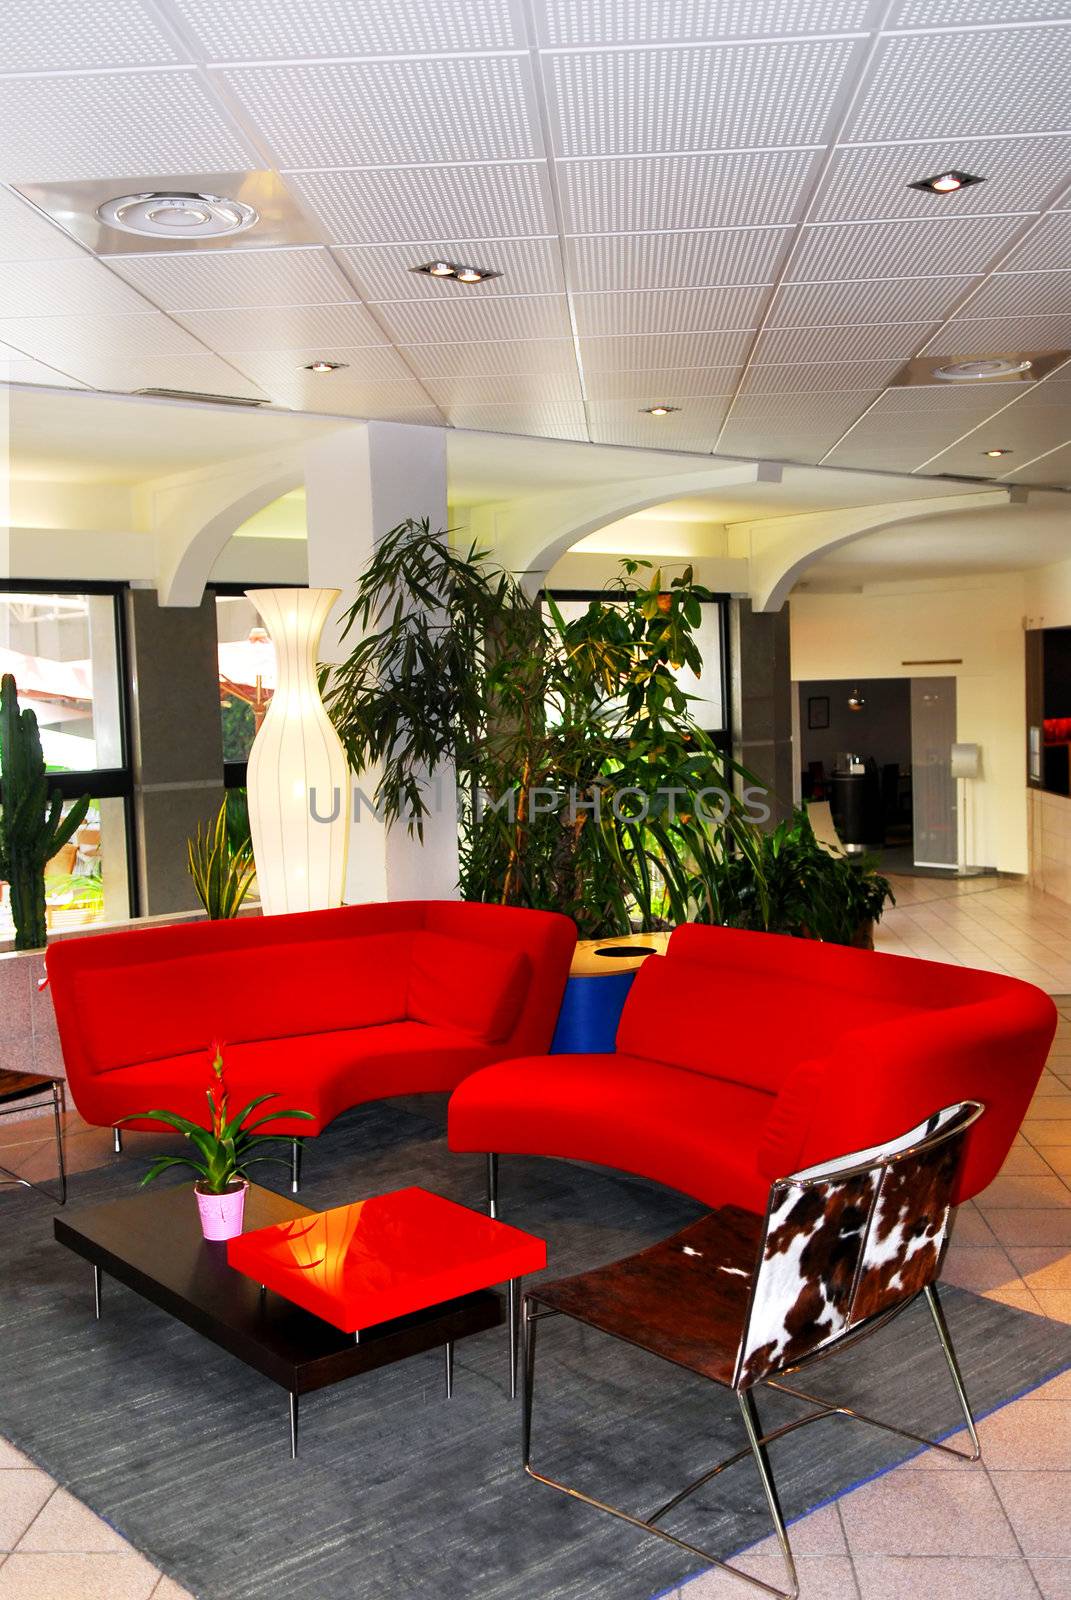 Interior of a modern european hotel lobby with red sofas